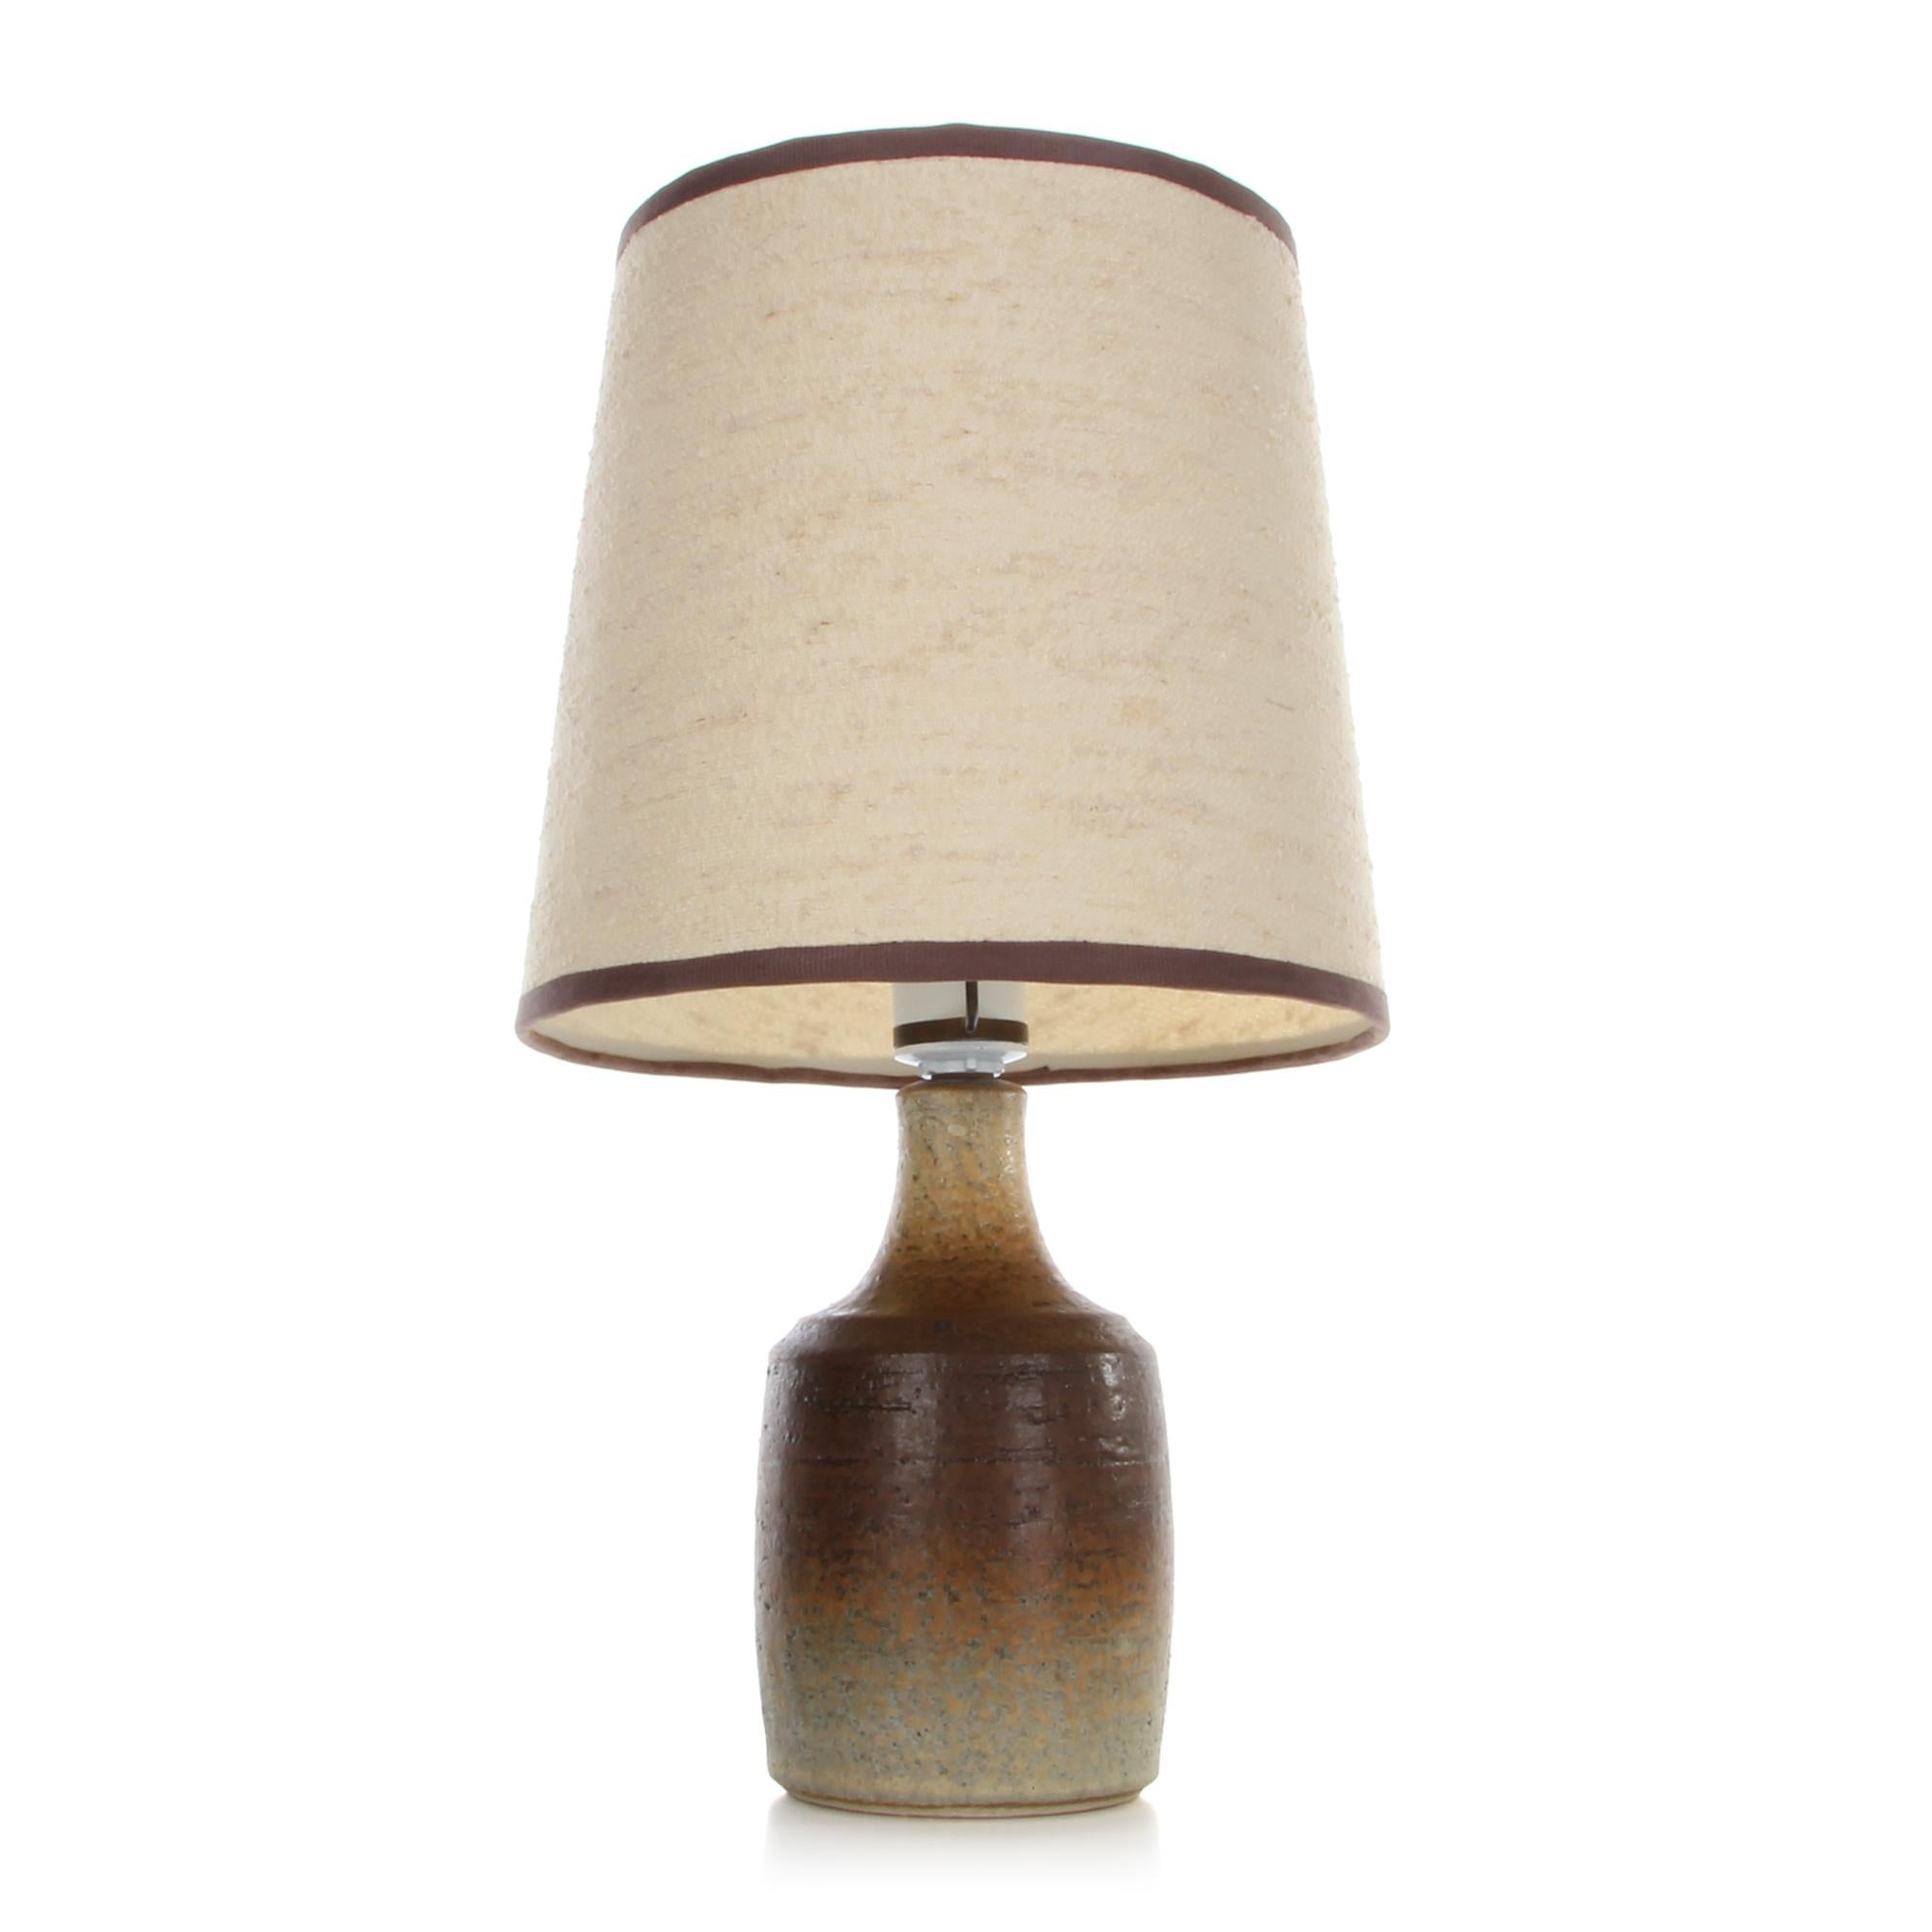 Scandinavian Modern Ceramic Table Lamp by Soholm Stentoj 1970s, with Vintage Shade Included